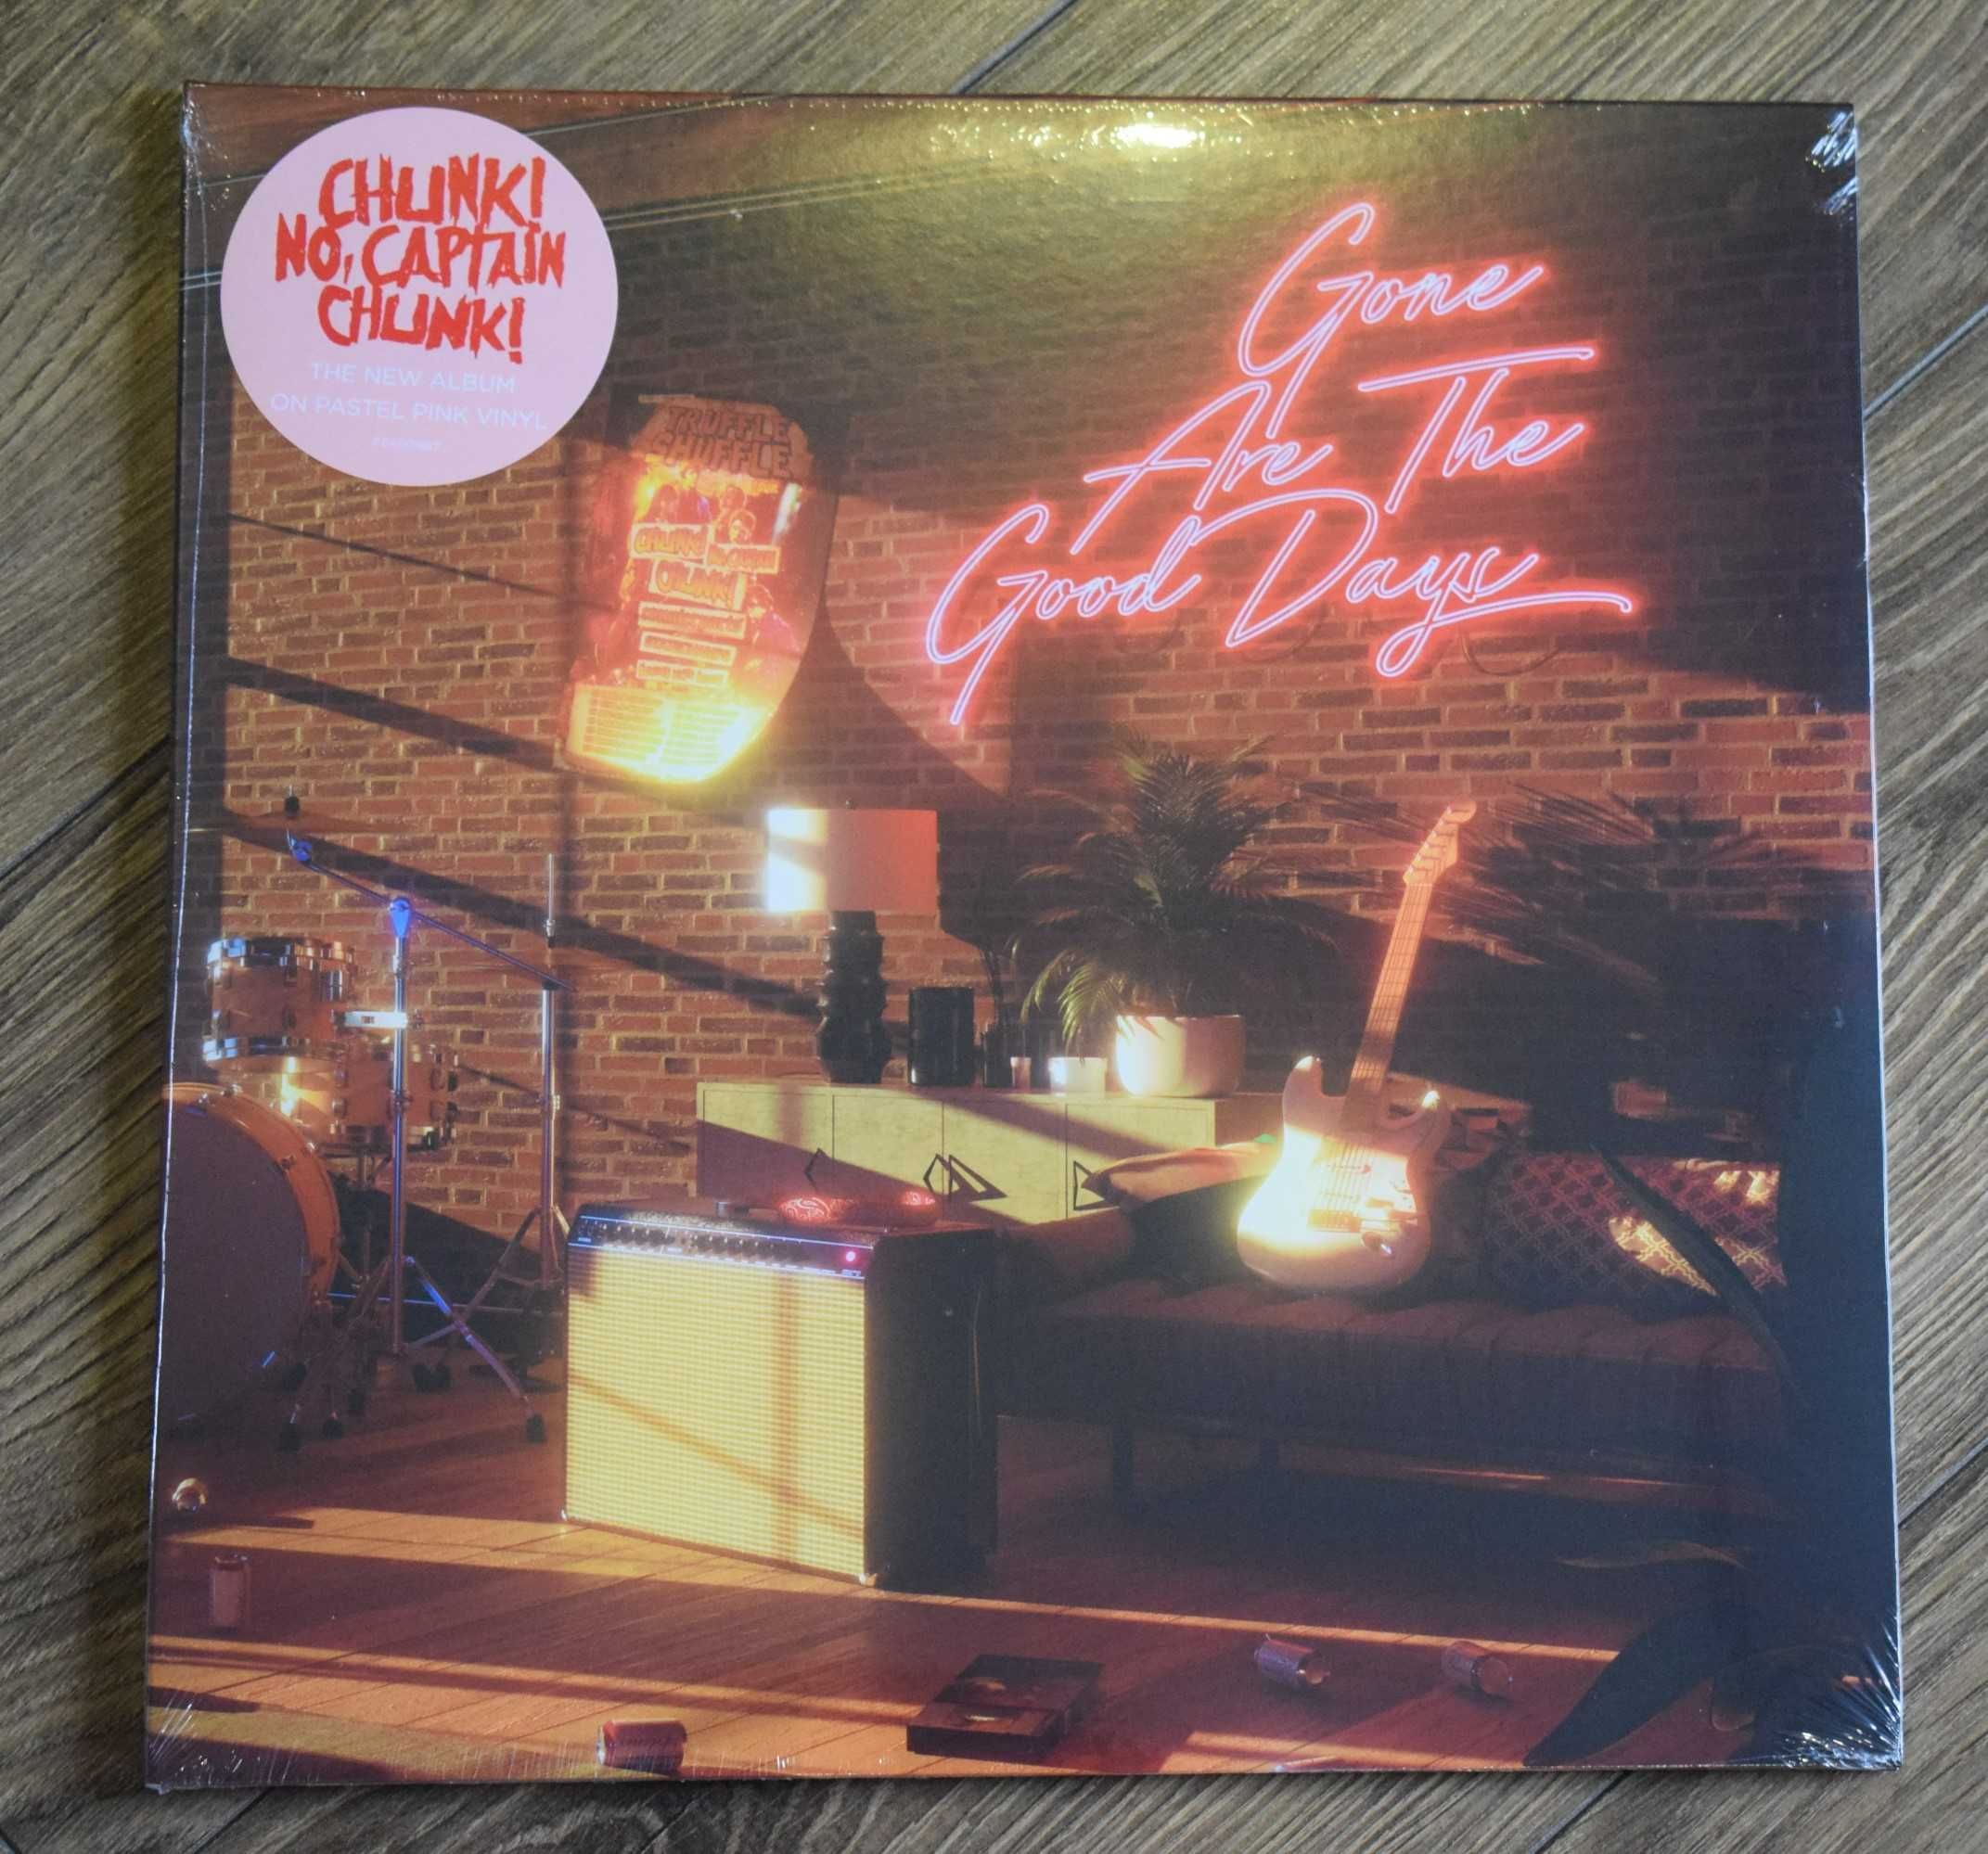 Chunk! No Captain Chunk! "Gone Are the Good Days" / 2LP